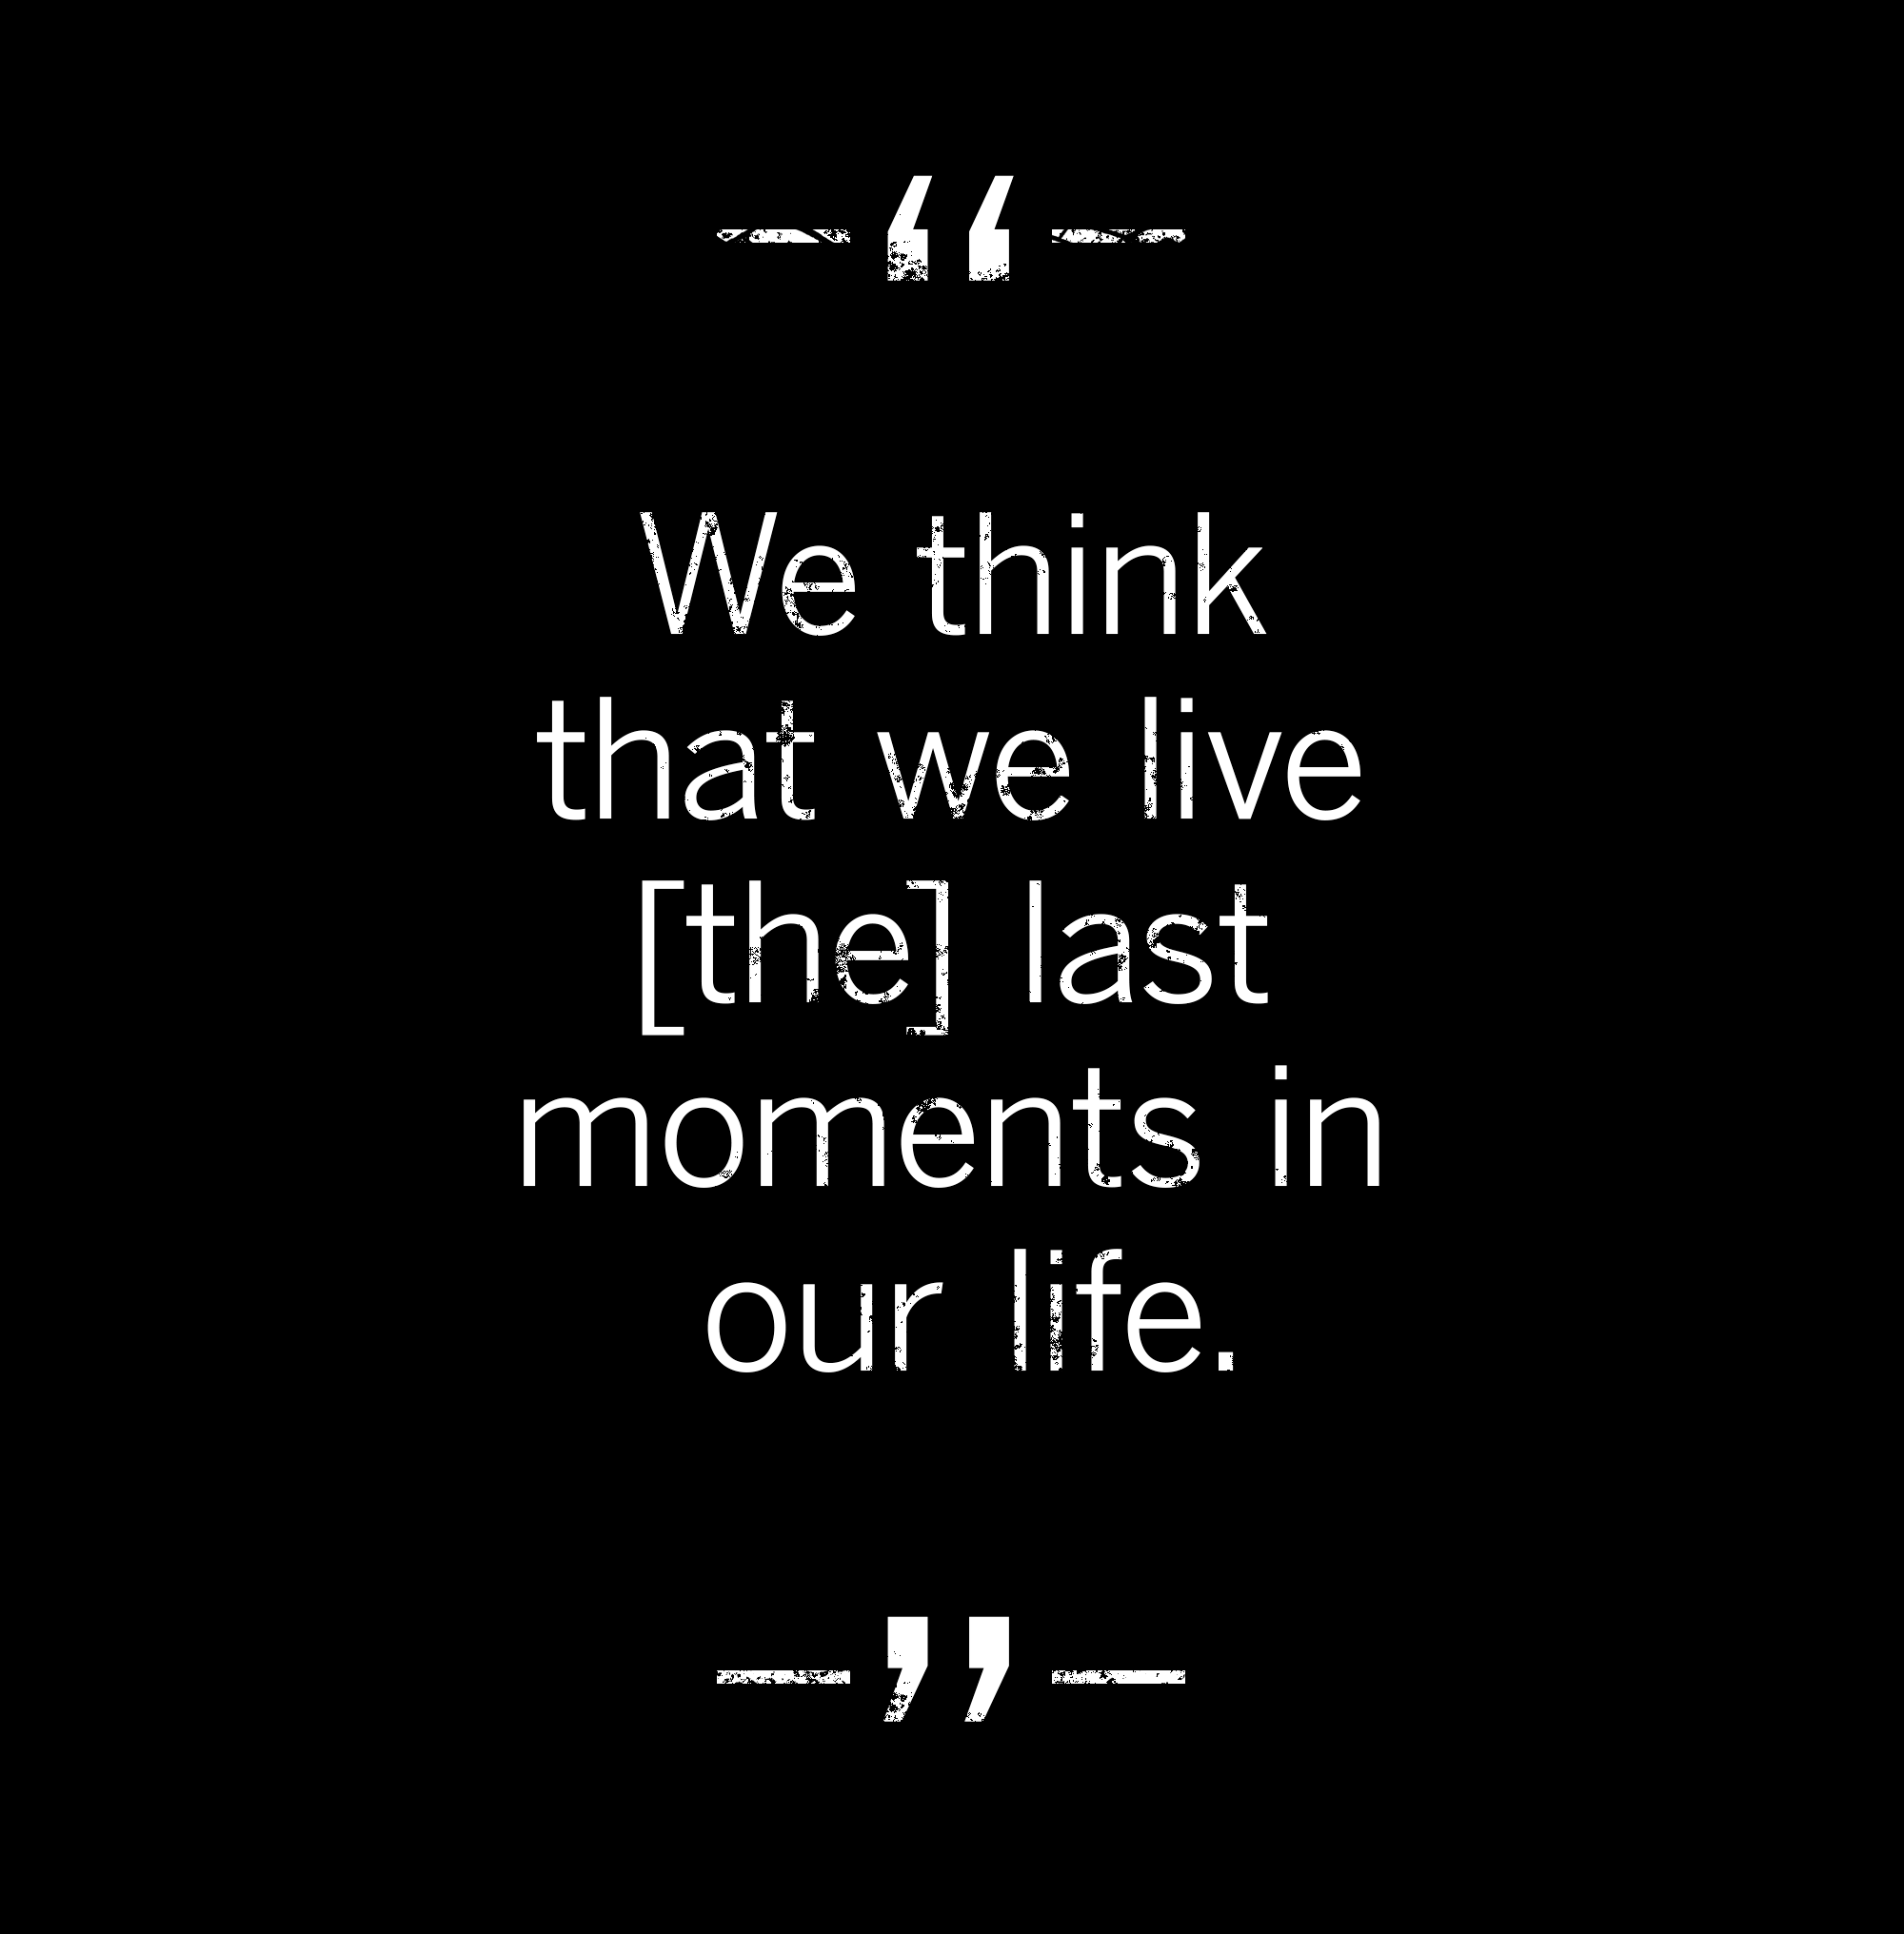 quote: We think that we live the last moments in our life